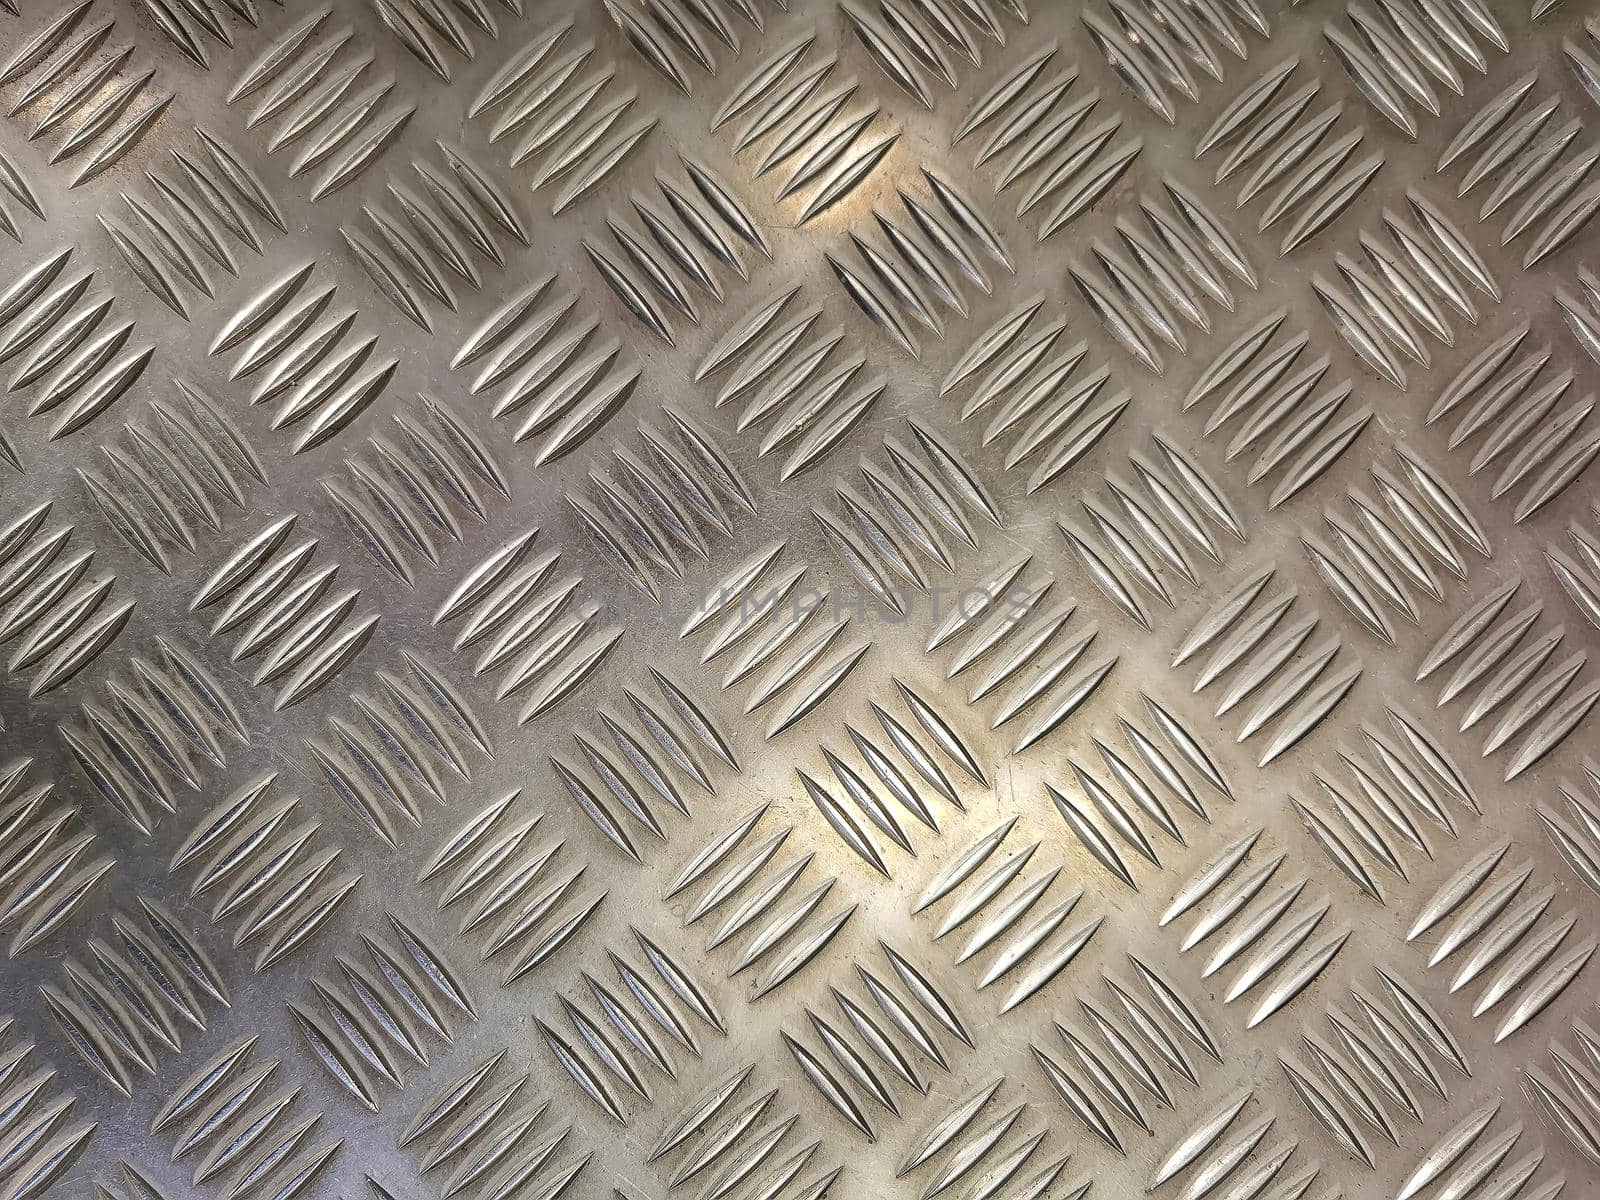 shiny metal texture with diamond pattern. stainless steel background. Industrial metal texture. 